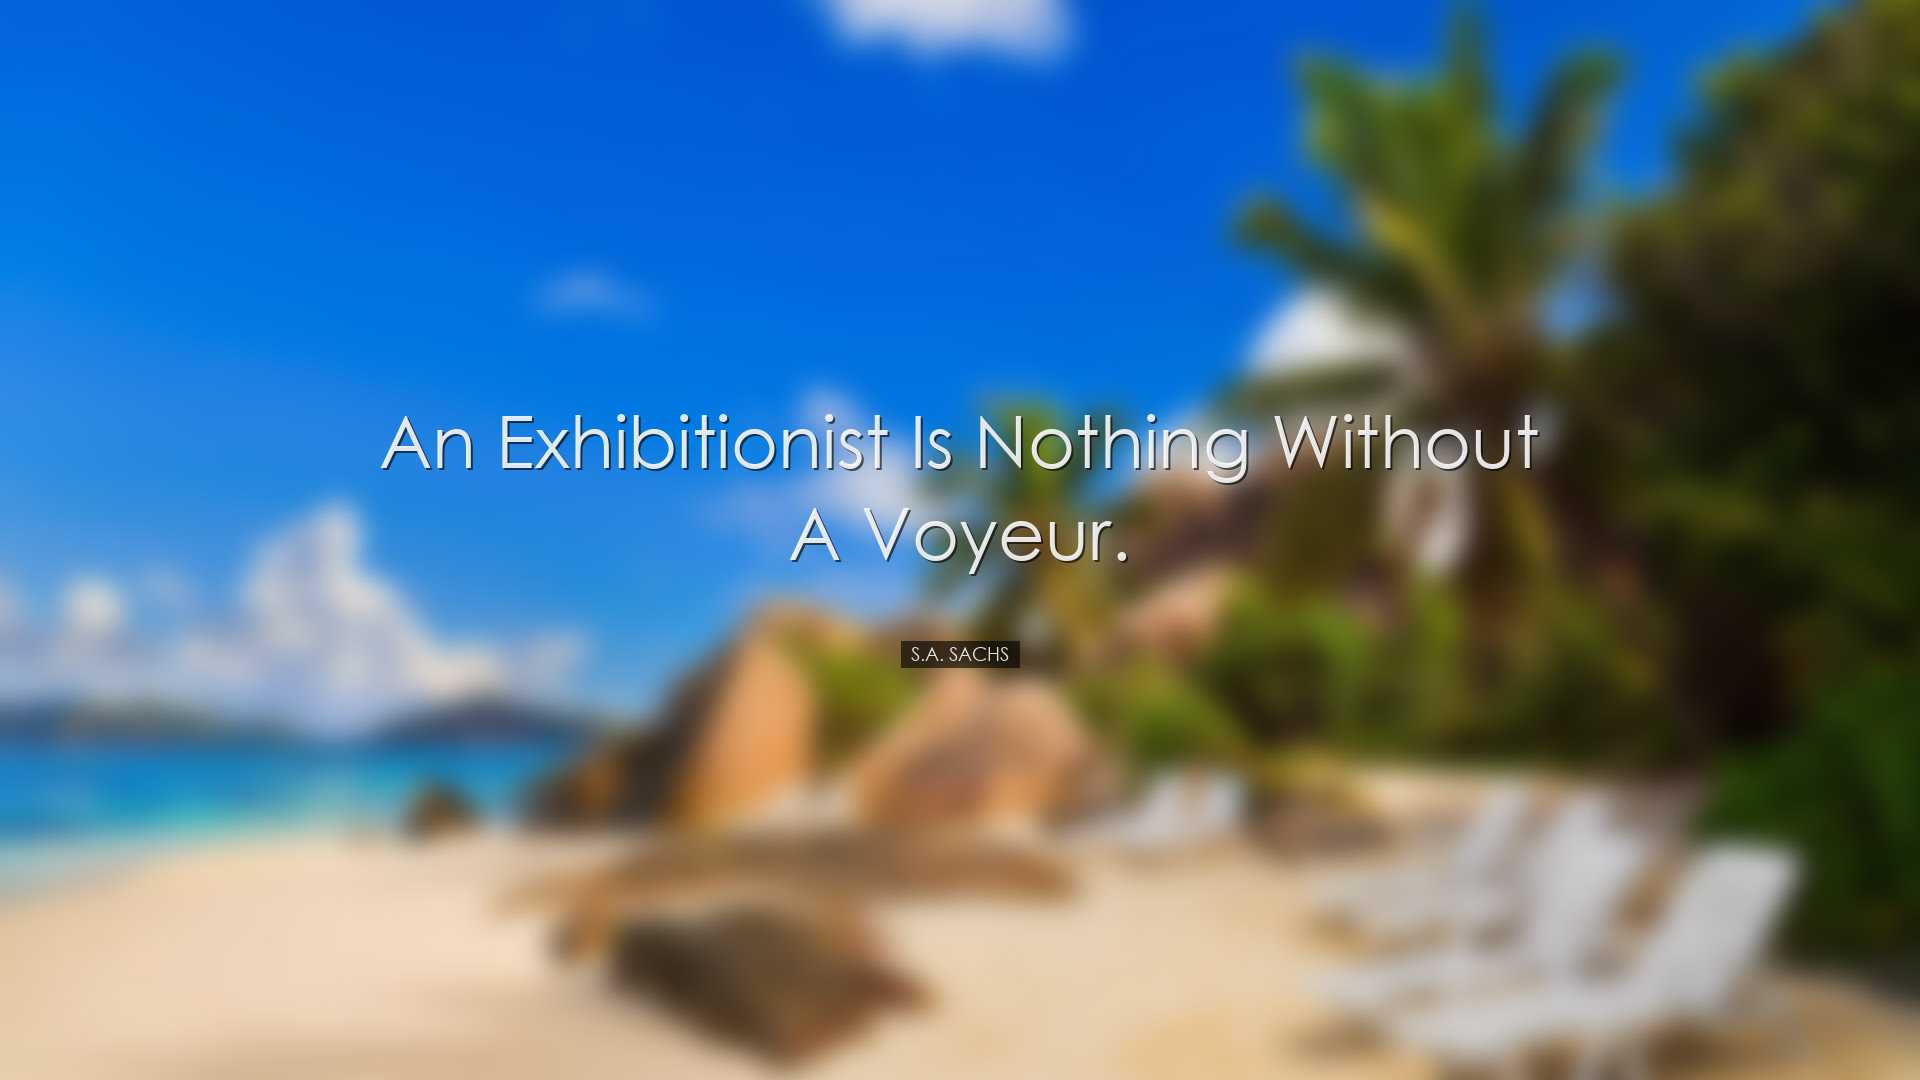 An exhibitionist is nothing without a voyeur. - S.A. Sachs